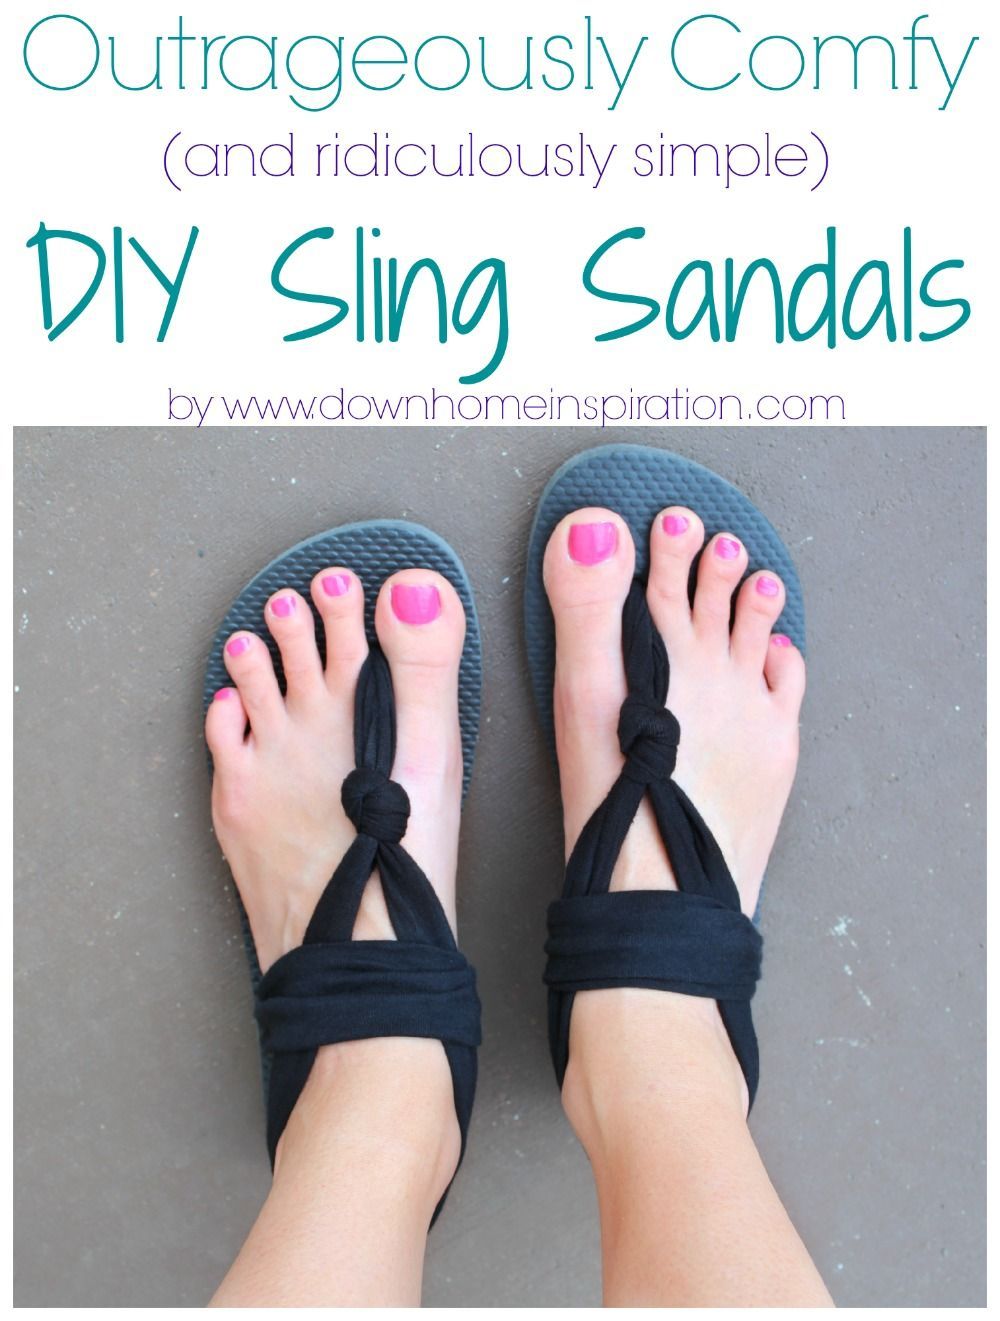 OMG, these are awesome!  And only $2.75 per pair!  Outrageously Comfy (and ridiculously simple) DIY Sling Sandals – Down Home